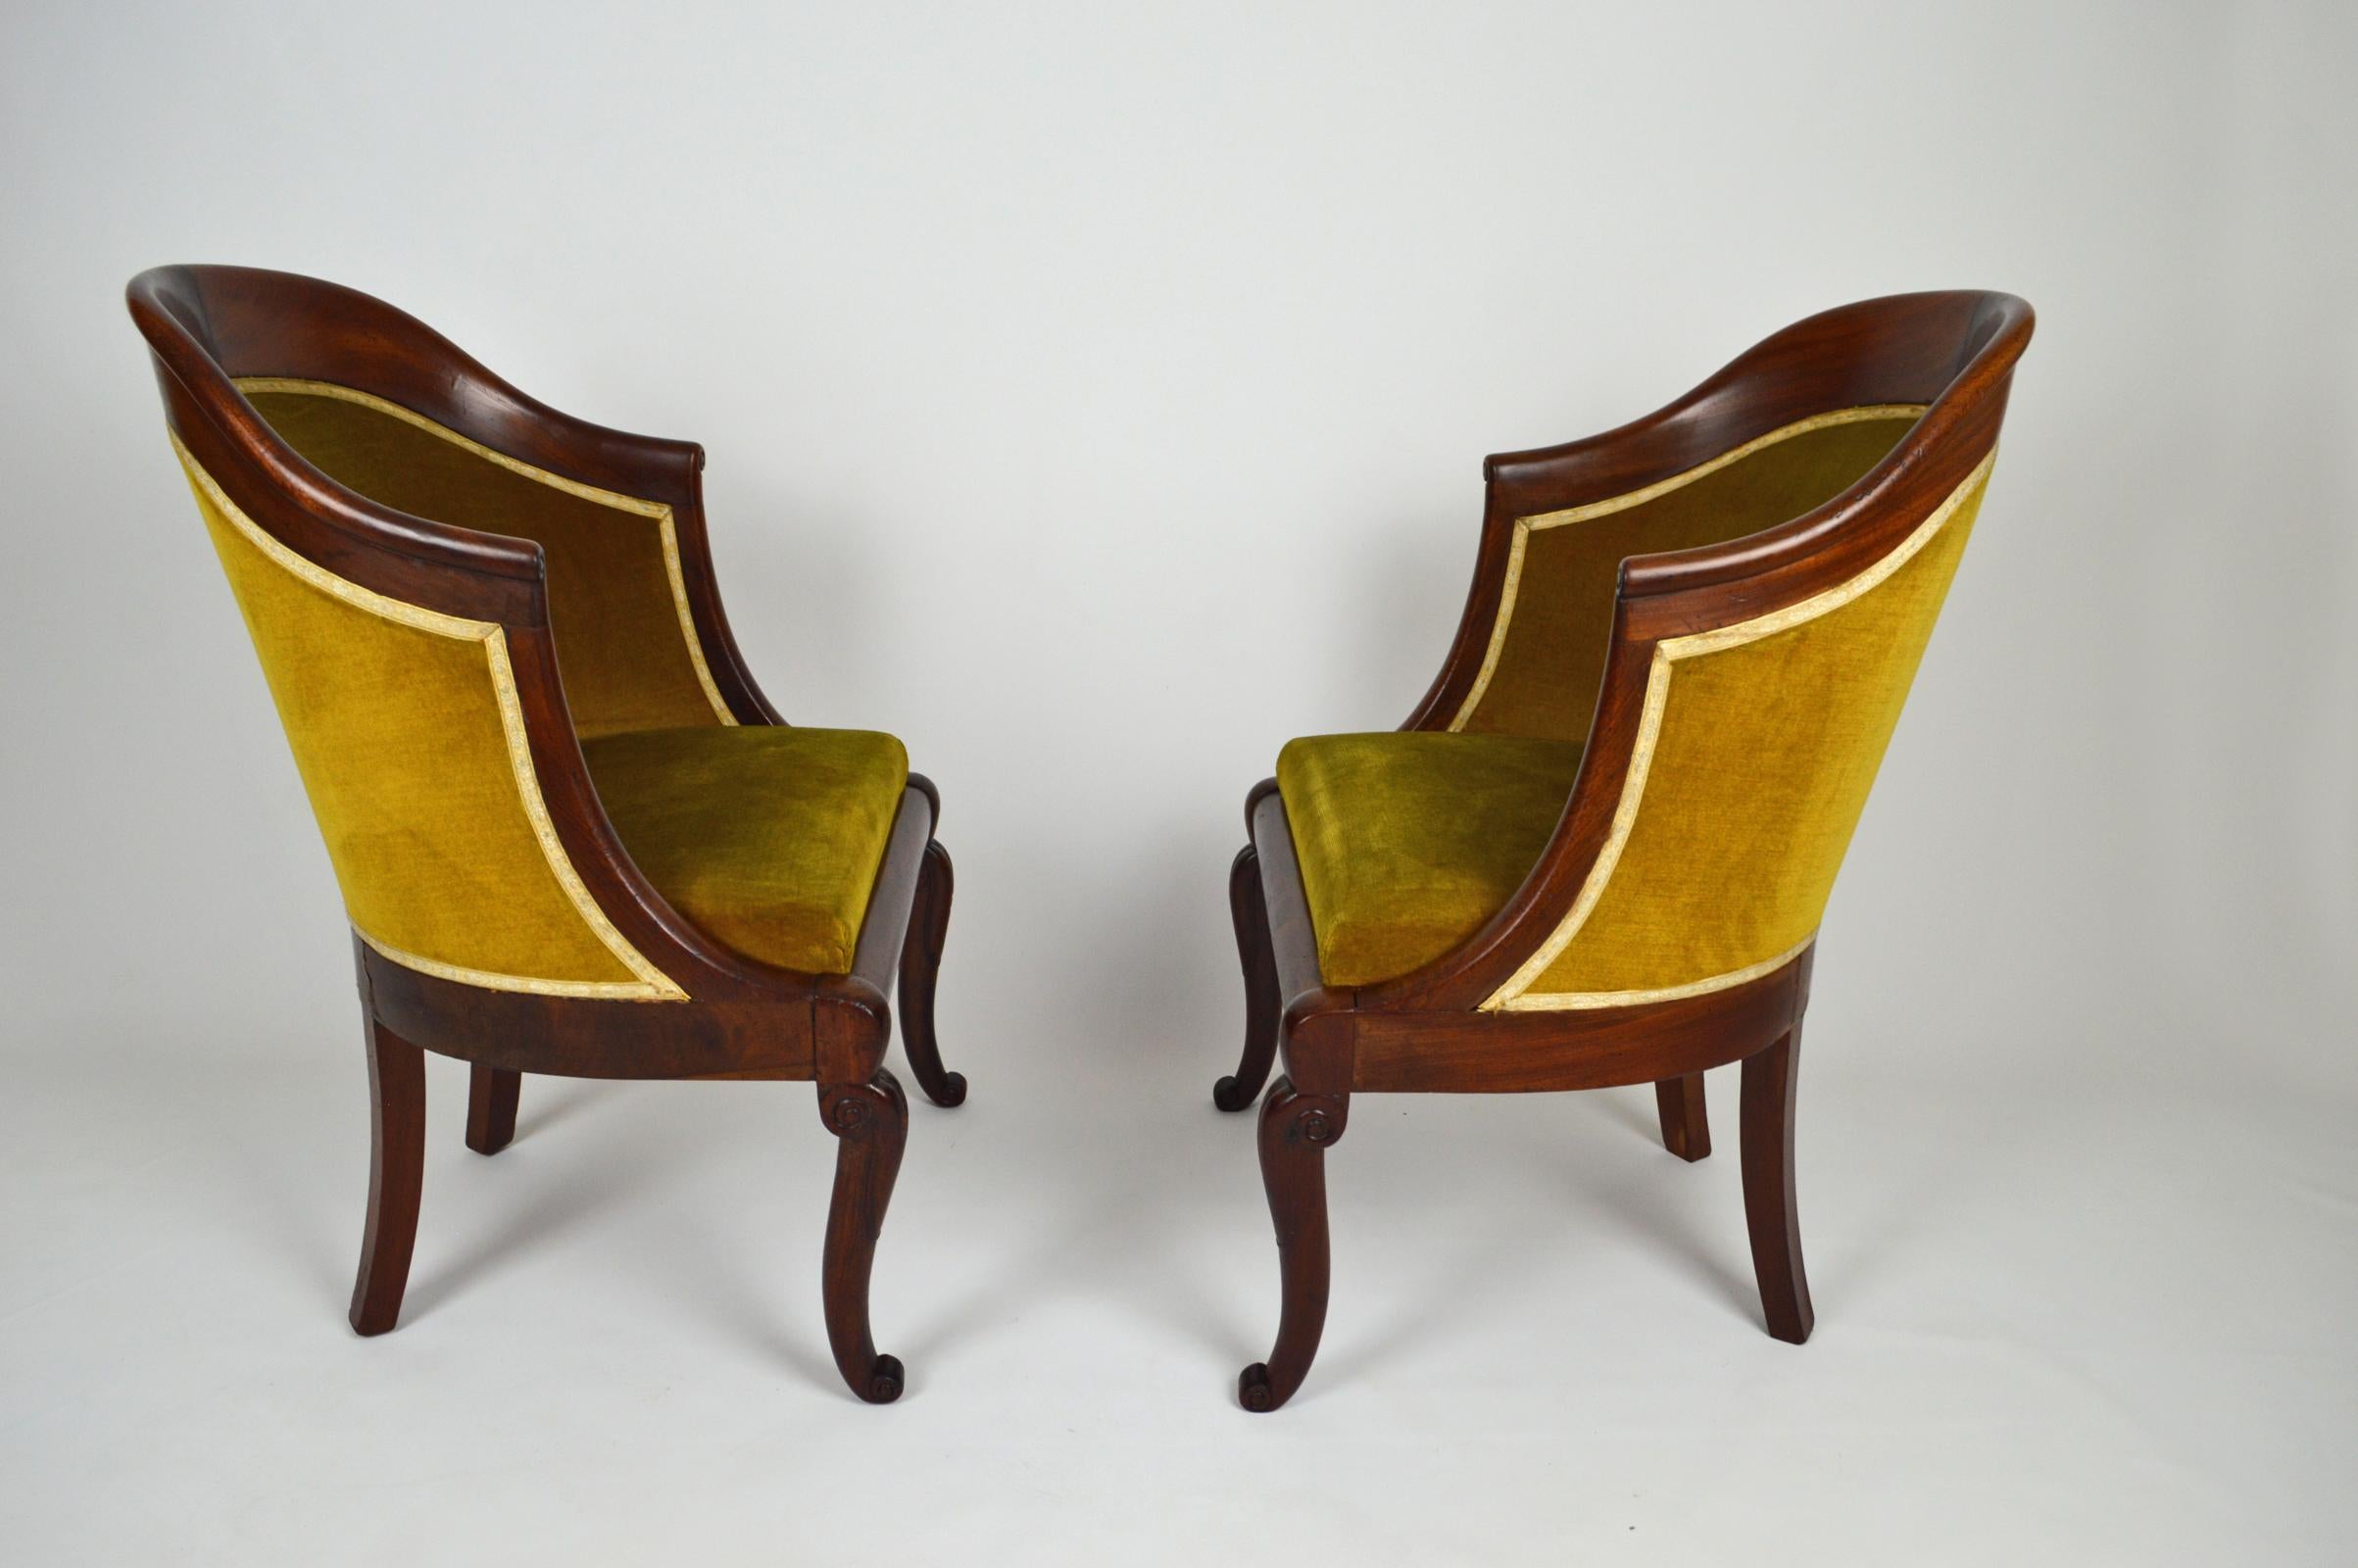 Pair of Armchairs / Tub Chairs in Carved Mahogany, France, Early 19th Century For Sale 2